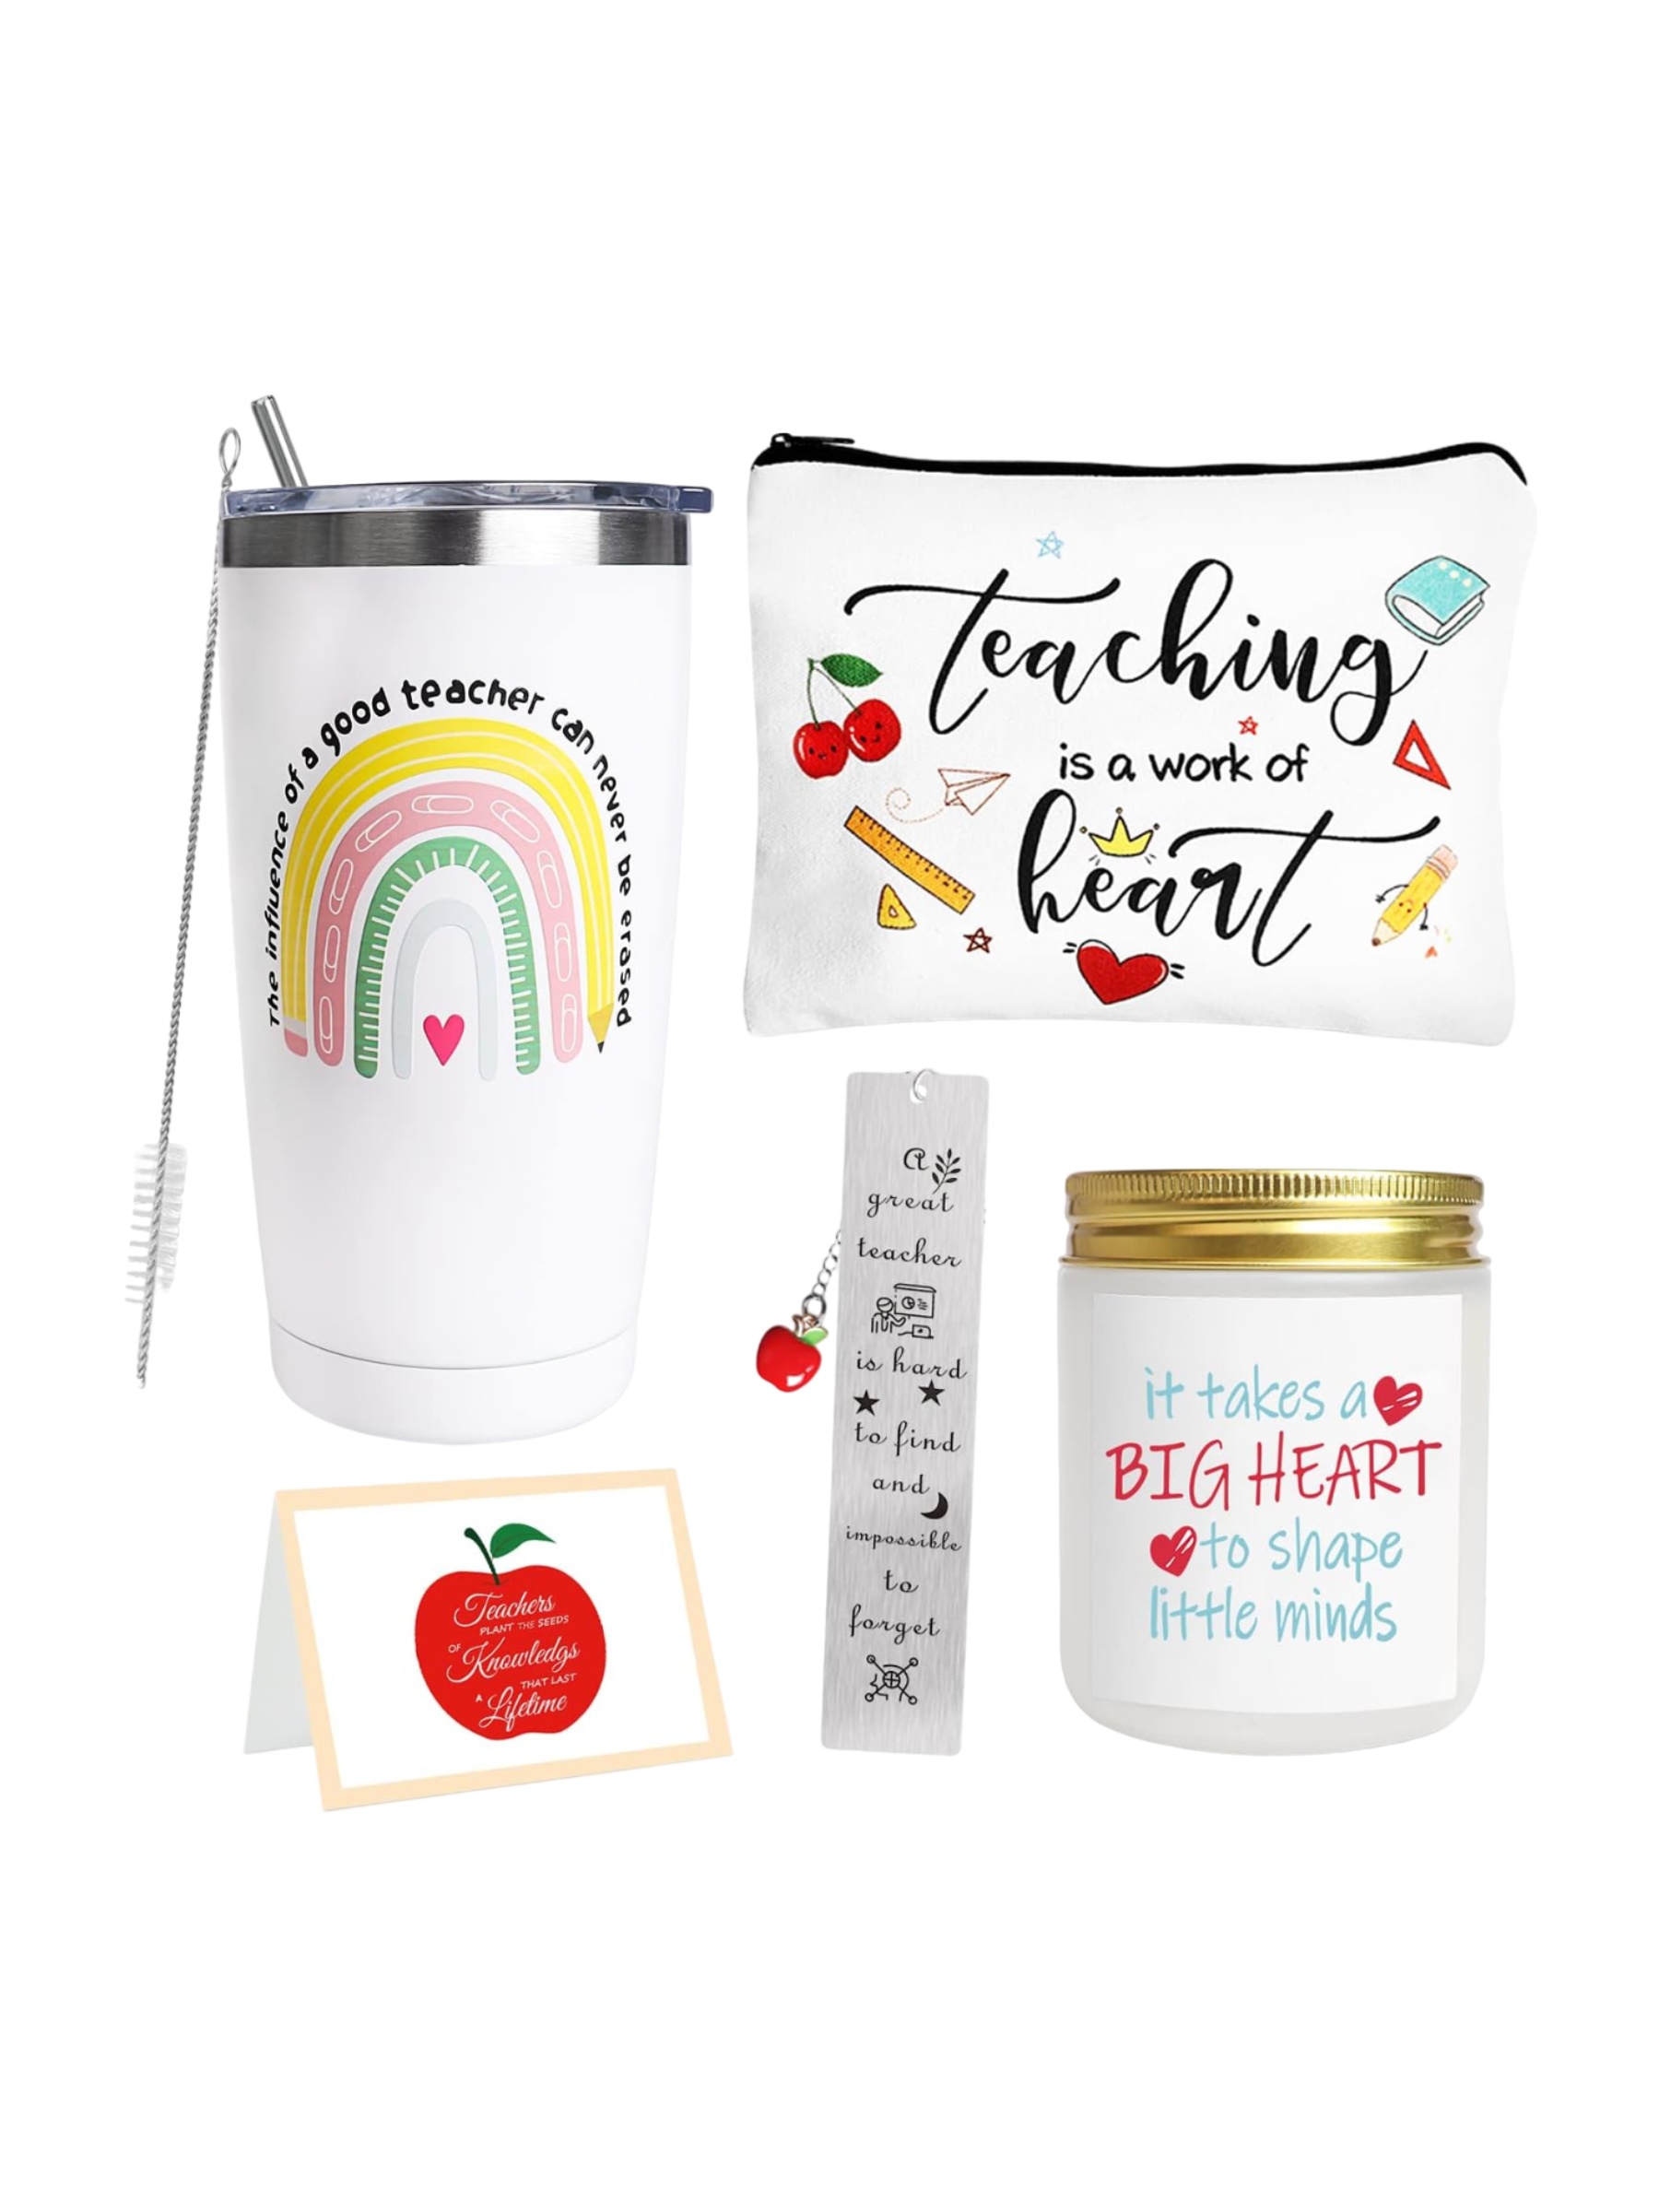 45 Best Gifts for Teachers That Are Unique and Will Show Your Appreciation